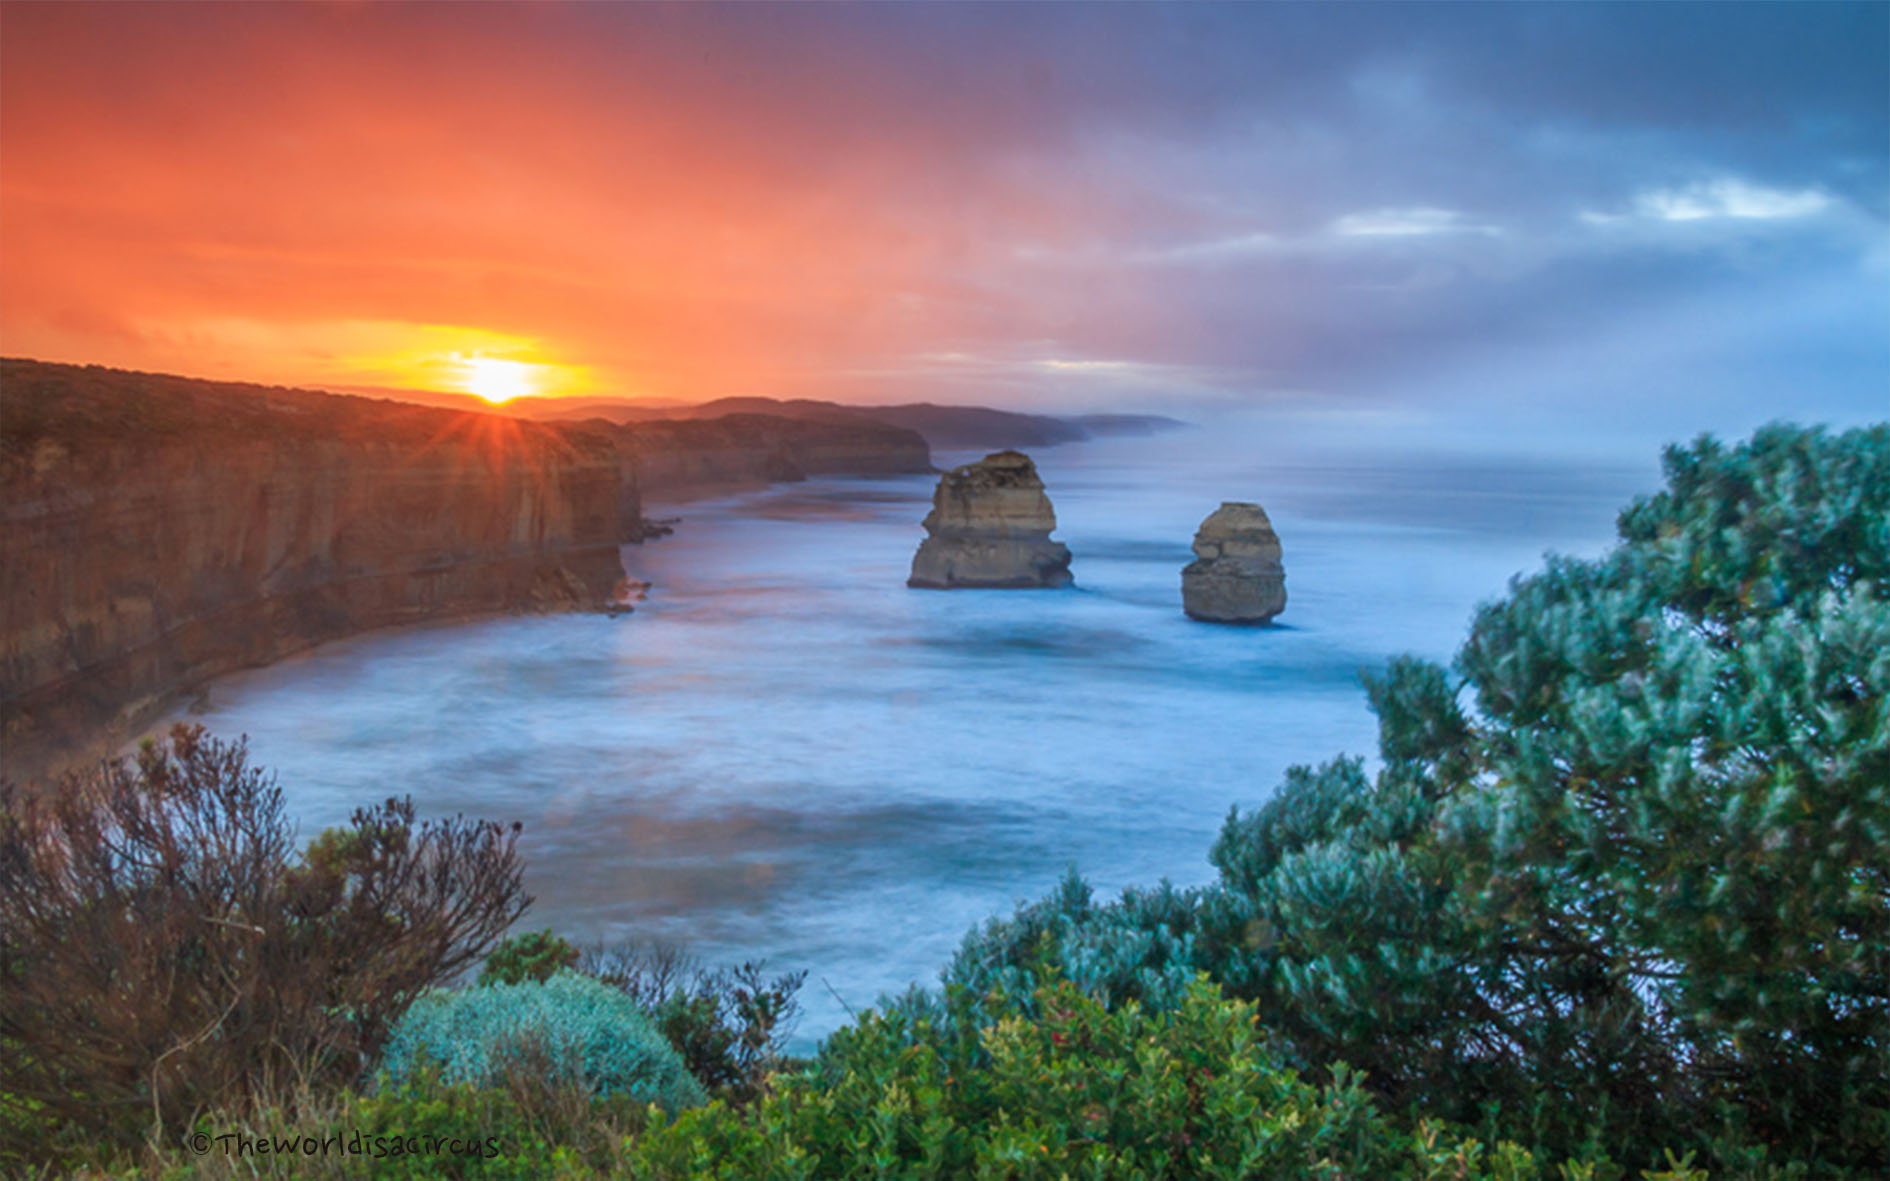 Sunset at the Great Ocean Road